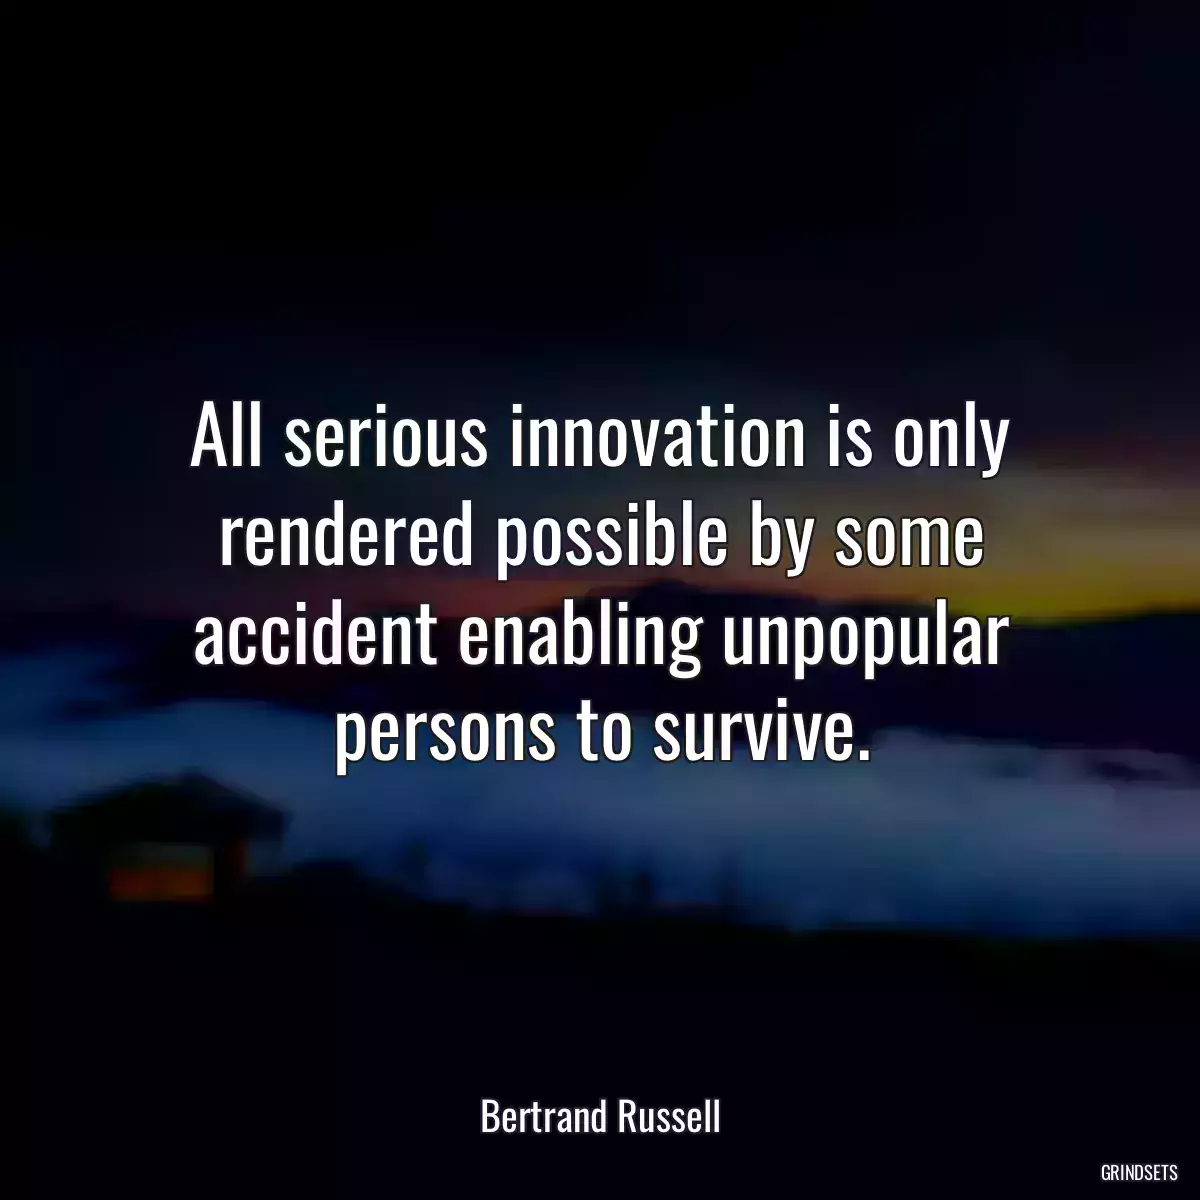 All serious innovation is only rendered possible by some accident enabling unpopular persons to survive.